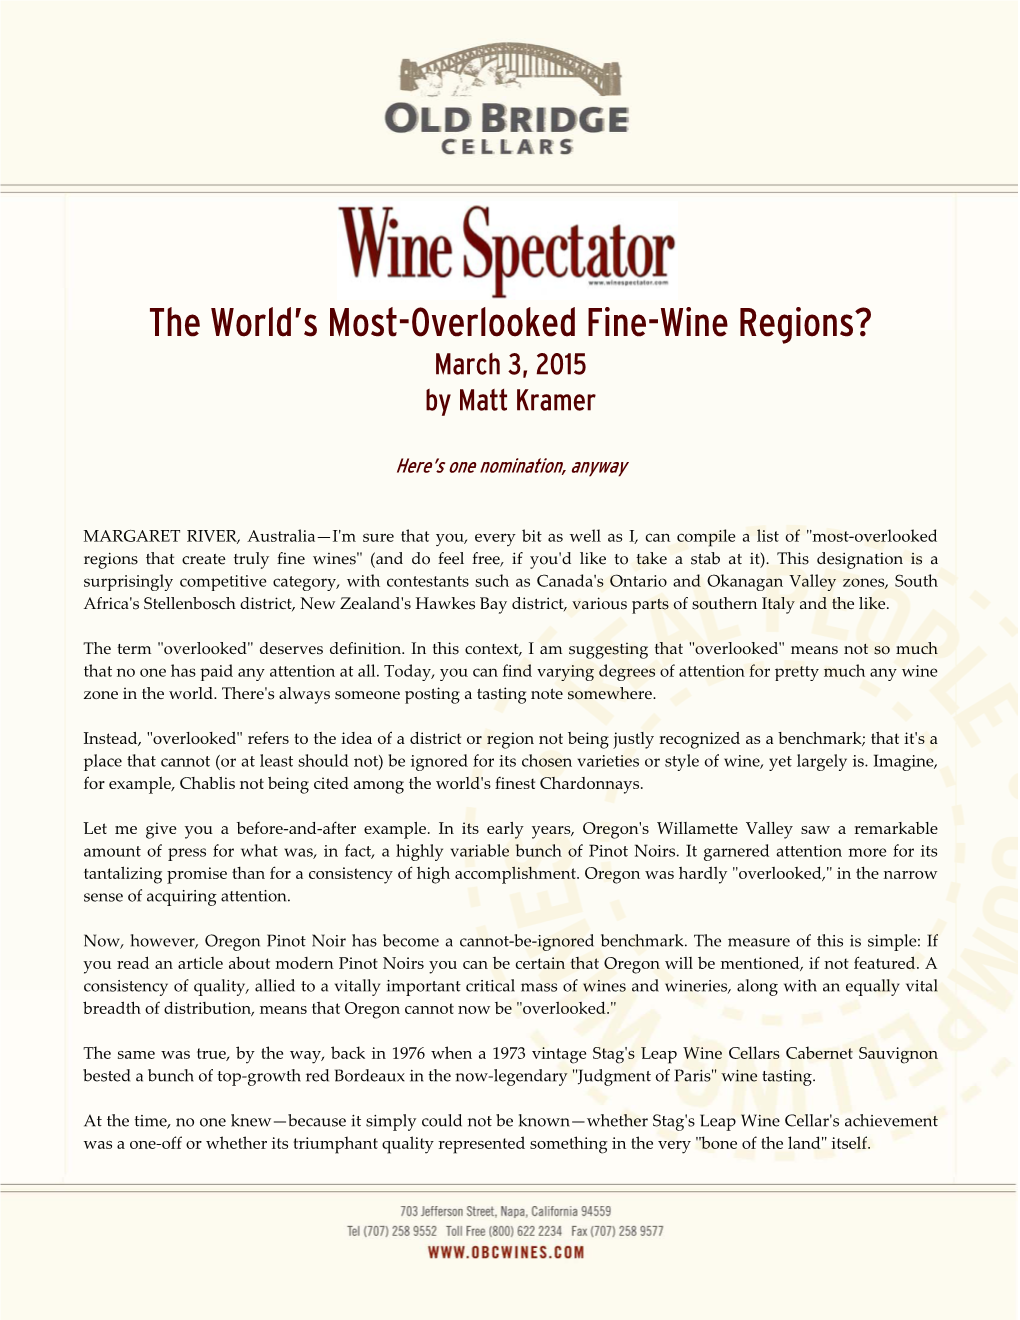 The World's Most-Overlooked Fine-Wine Regions?